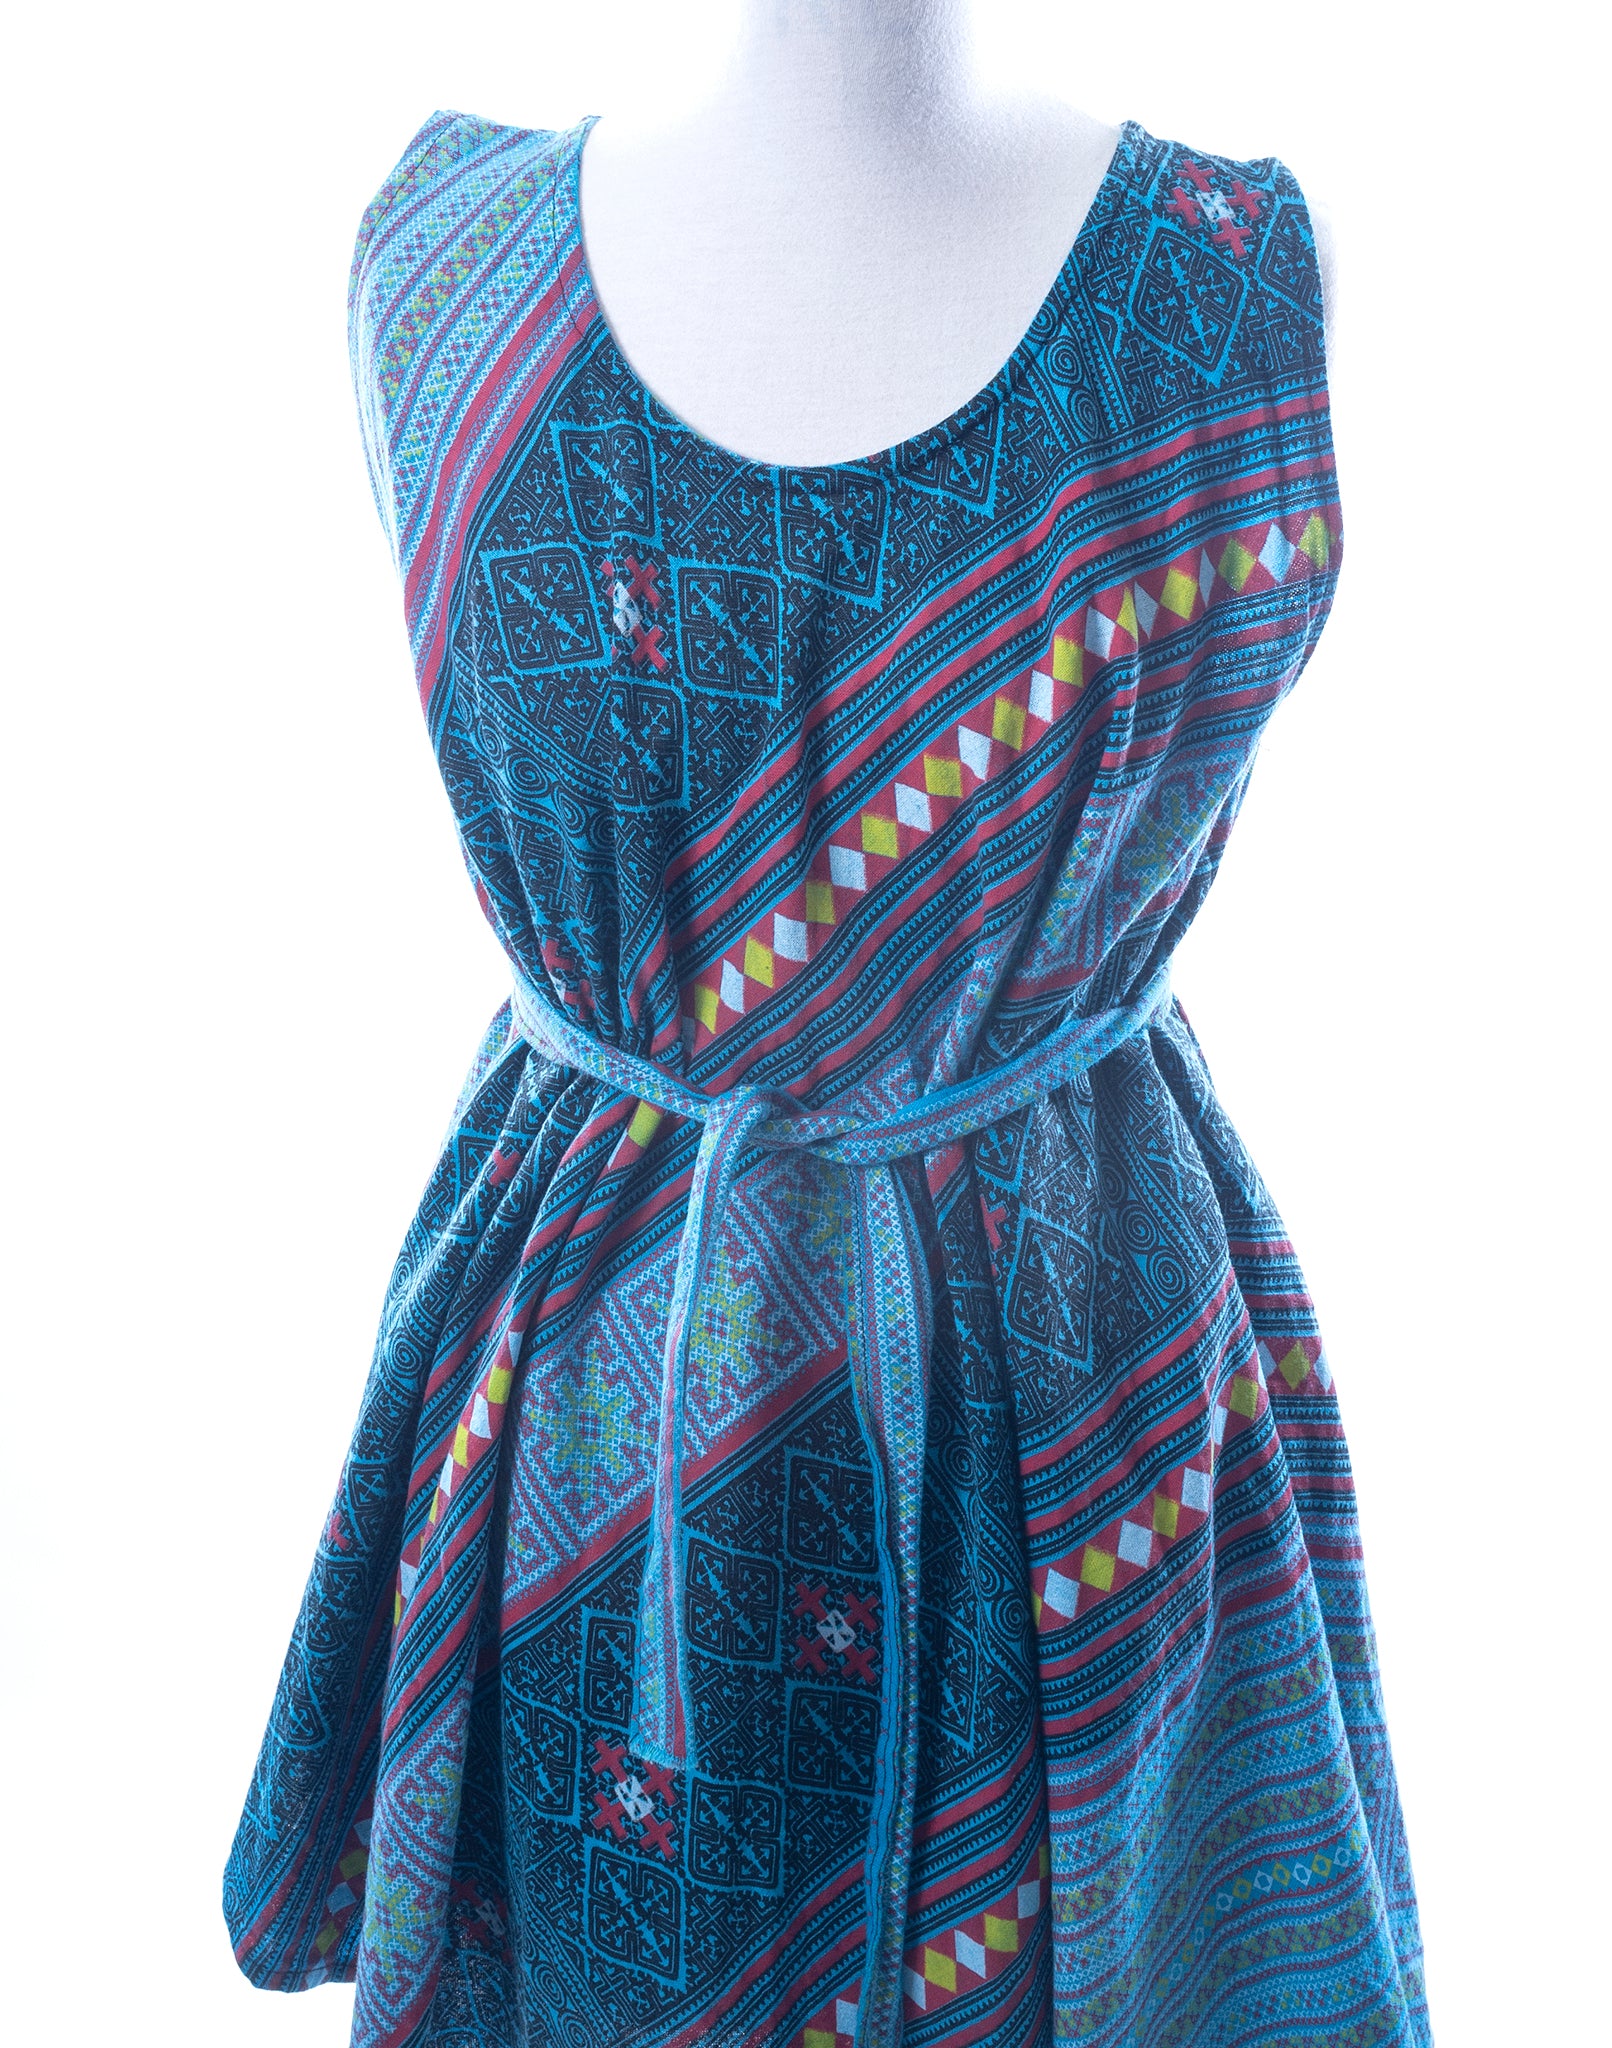 Vintage 90's Tribal Fabric Swing Dress Top - Size S / M